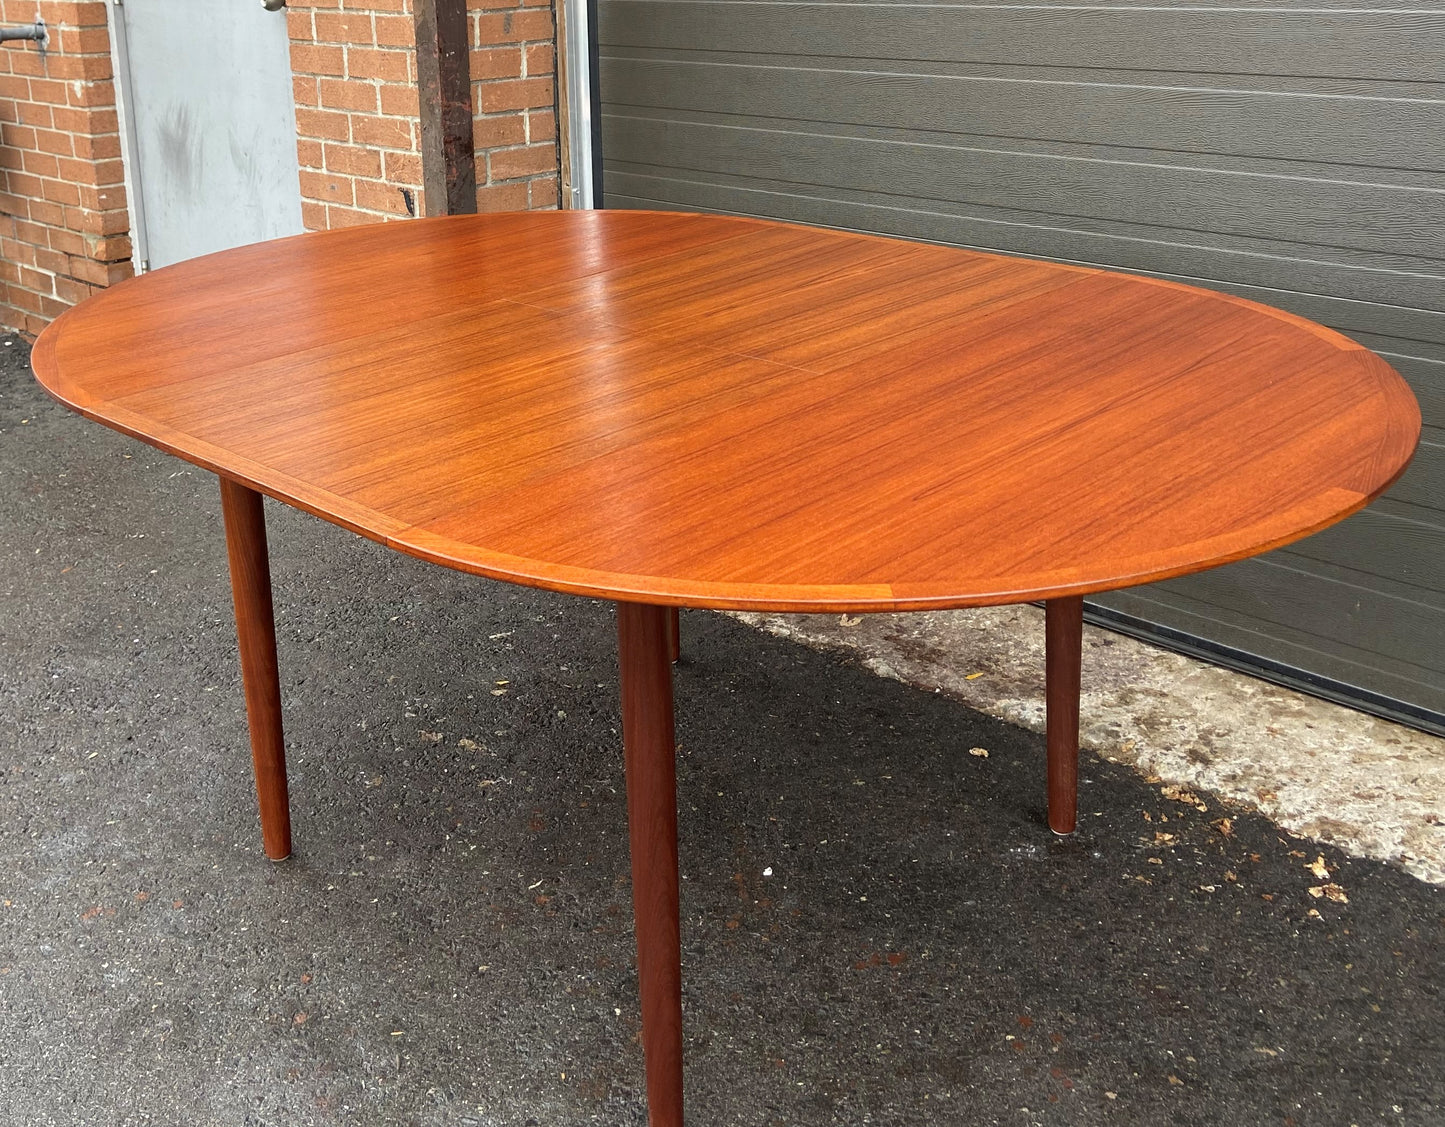 REFINISHED Danish MCM Teak Dining Table Round to Oval w Butterfly Leaf 48"-71" Perfect